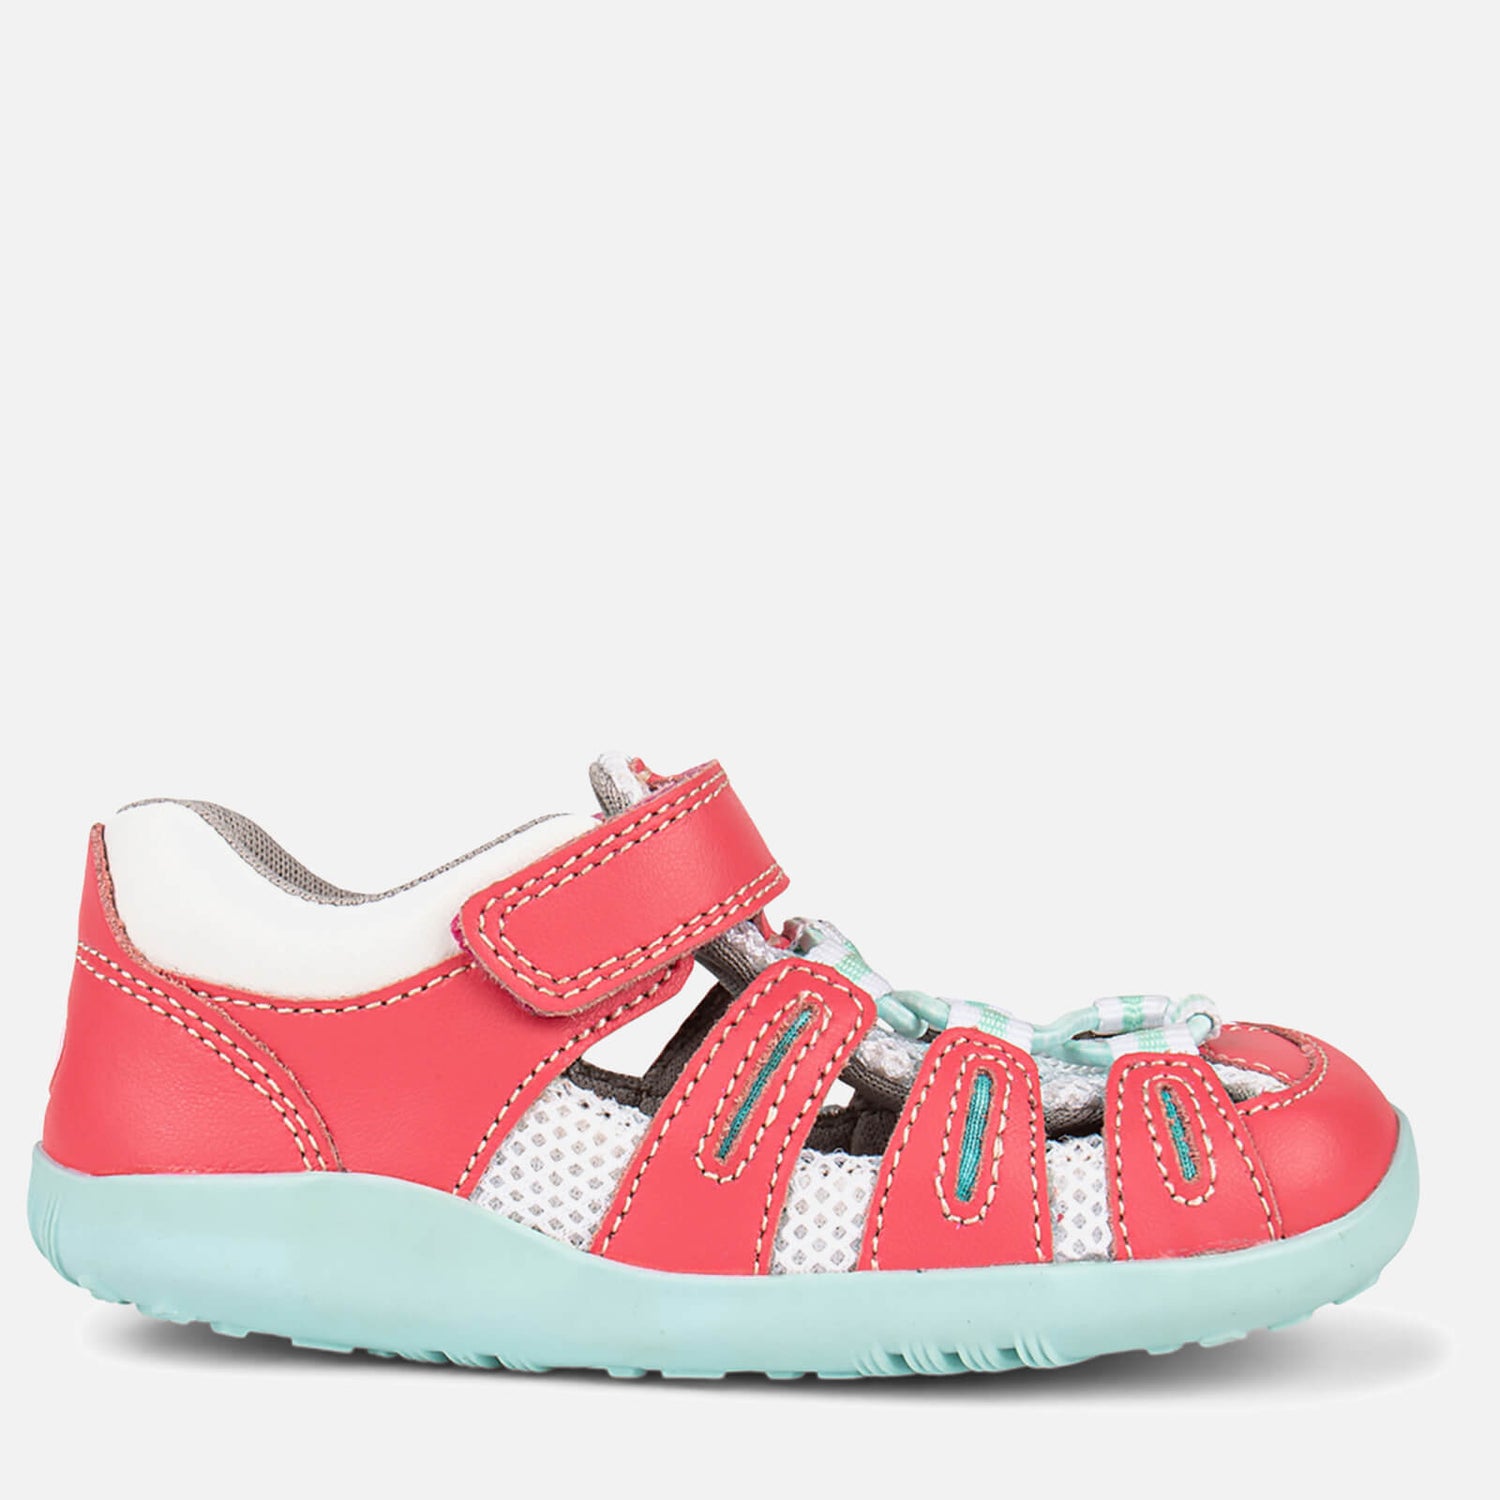 Bobux Toddlers' I-Walk Summit Water Shoes - Guava Mint